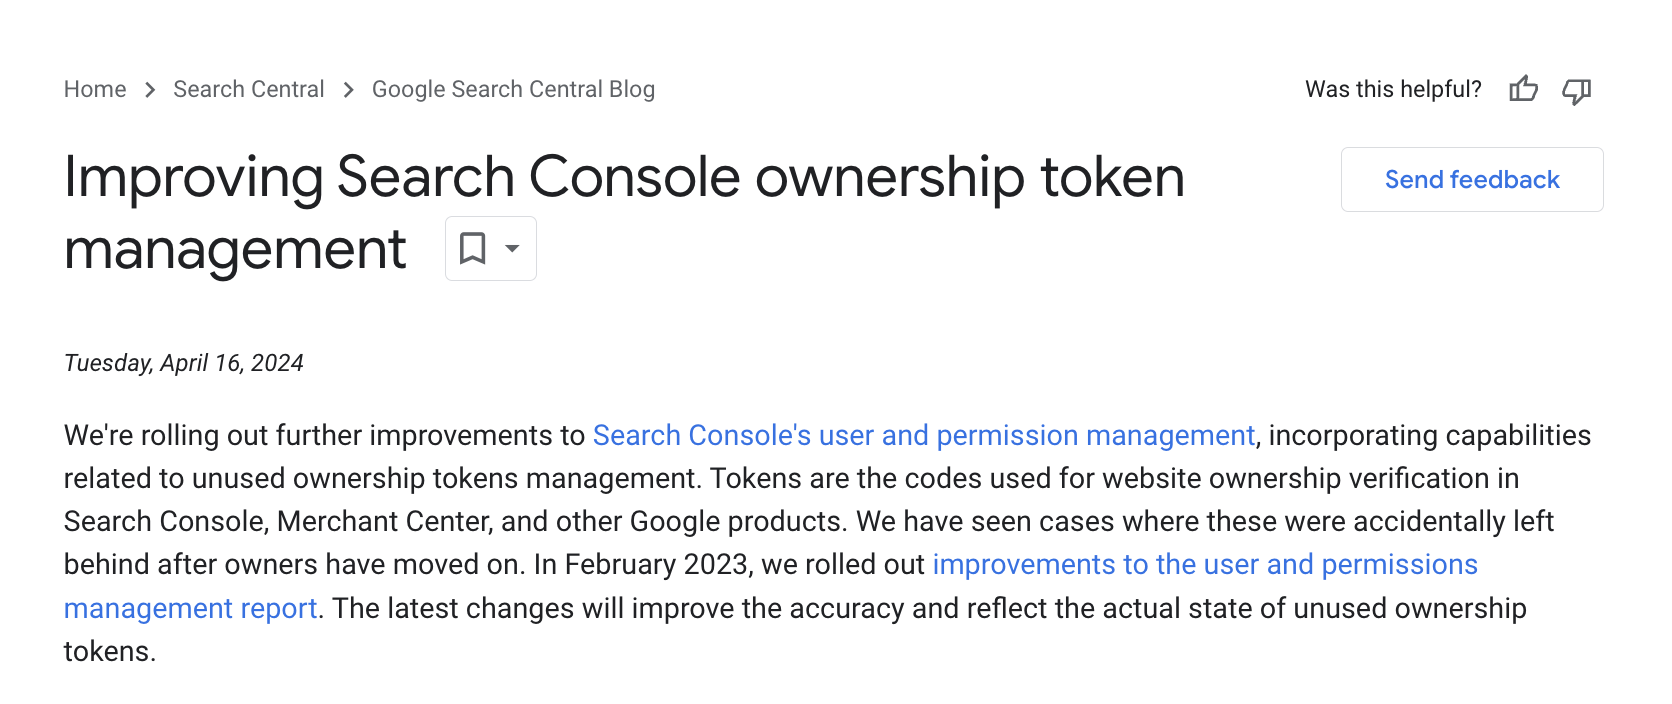 search console ownership management